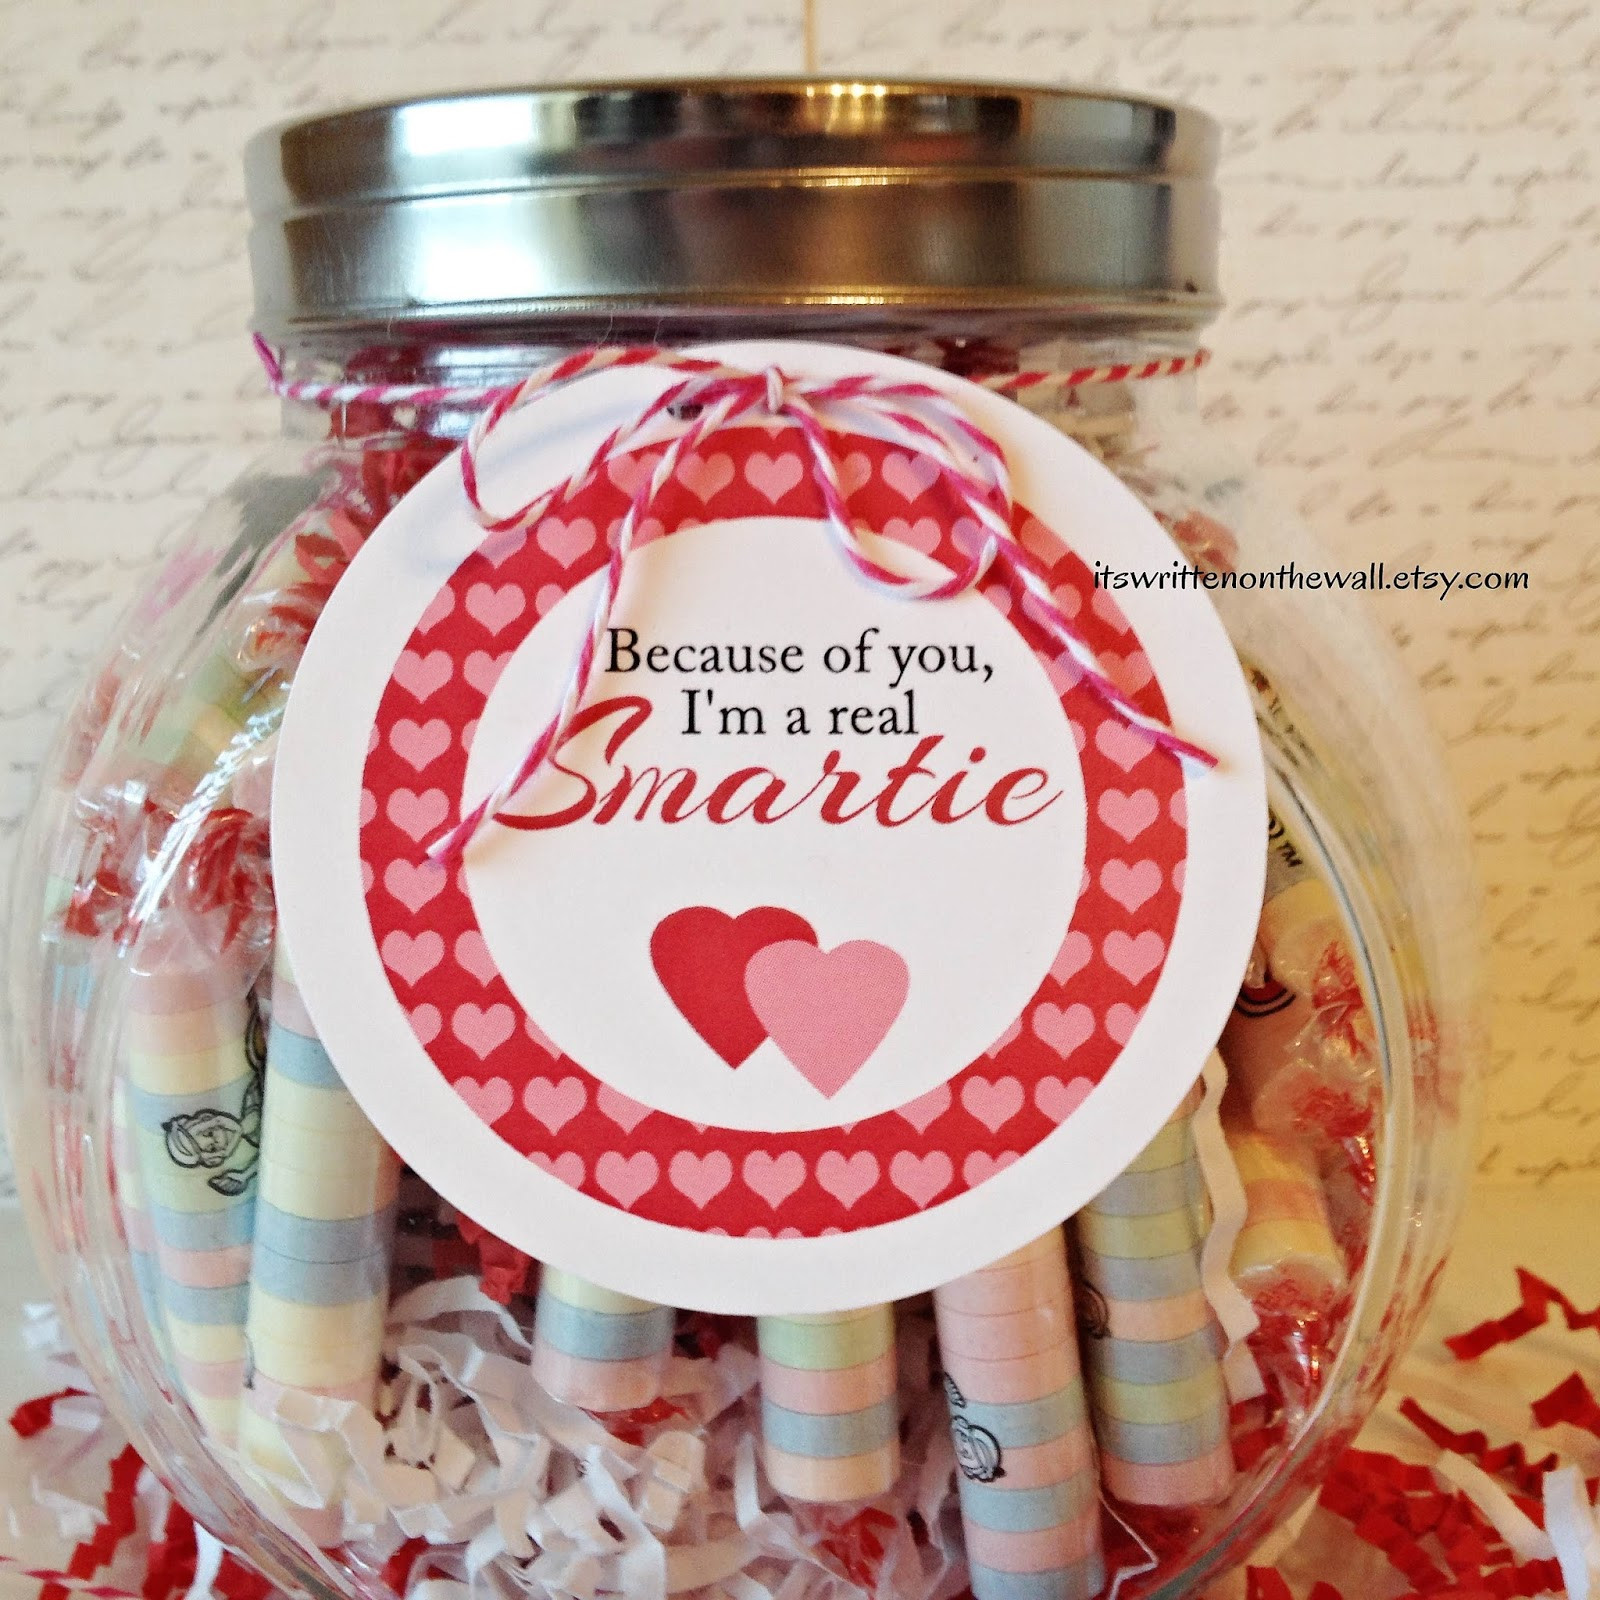 Teacher Valentines Gift Ideas
 It s Written on the Wall "Because of you I m a Smartie